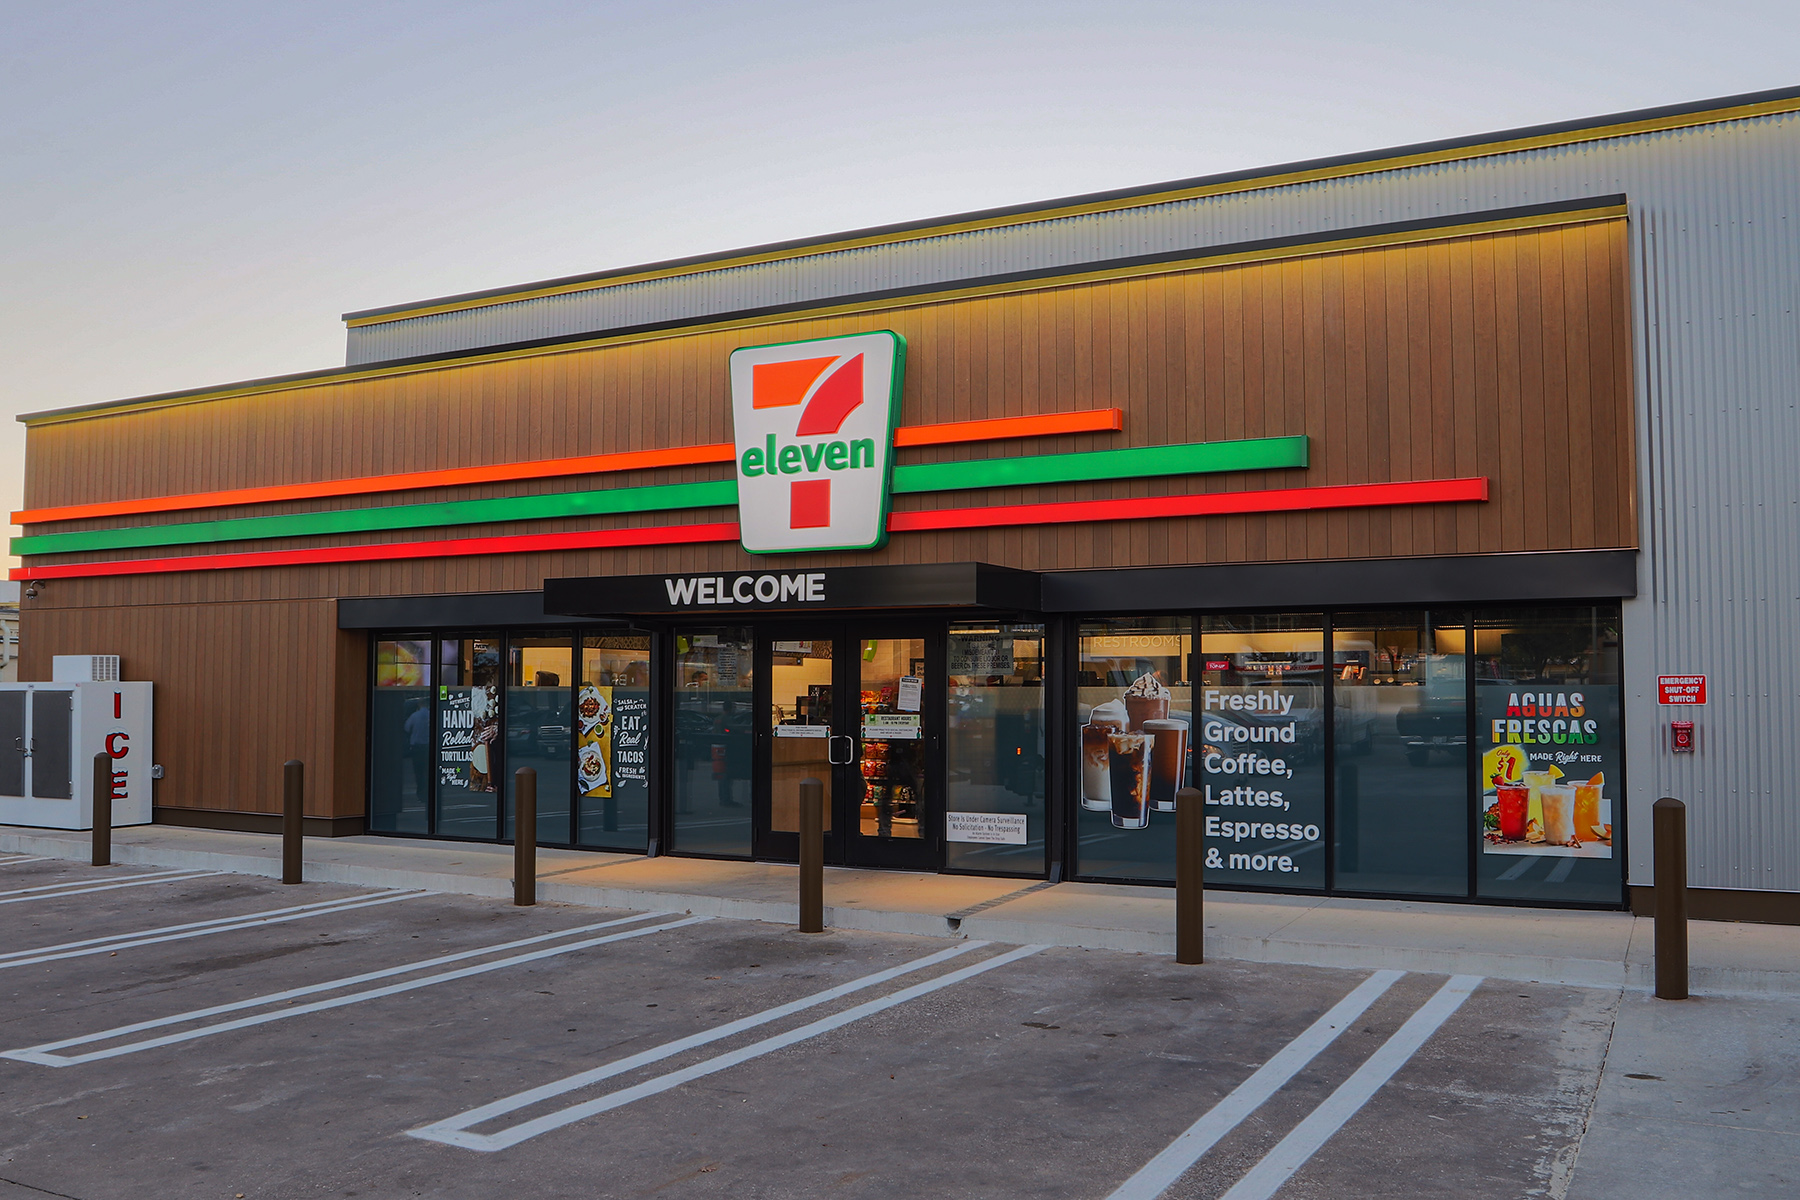 Hanley Investment Group Arranges Sales of Two New Construction 7-Elevens in Riverside County, Calif., for $10.15 Million